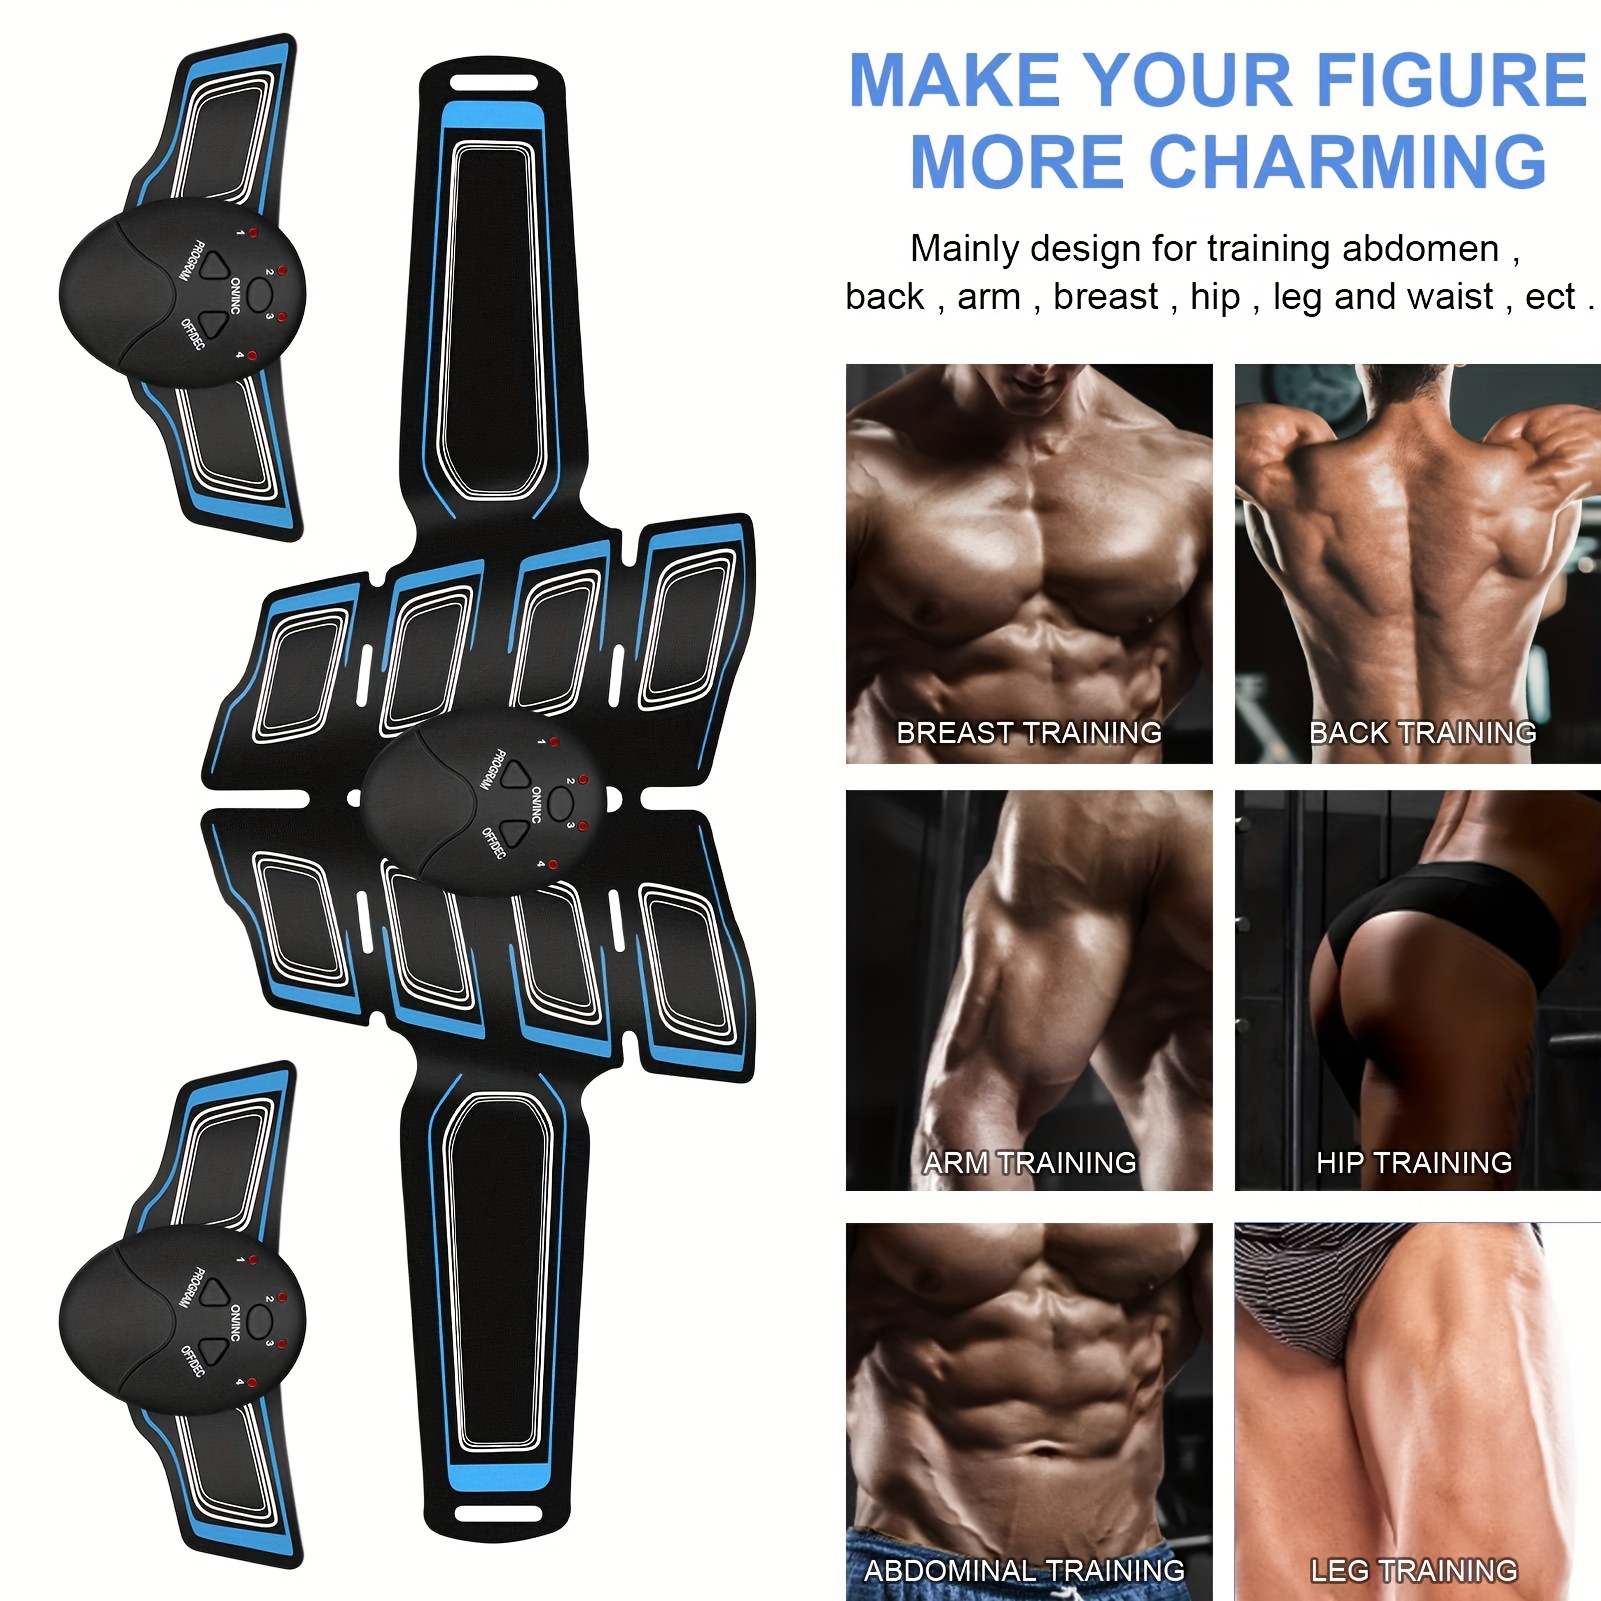 Muscle Stimulator for Abs, Arms, Hips, Back & Legs USB